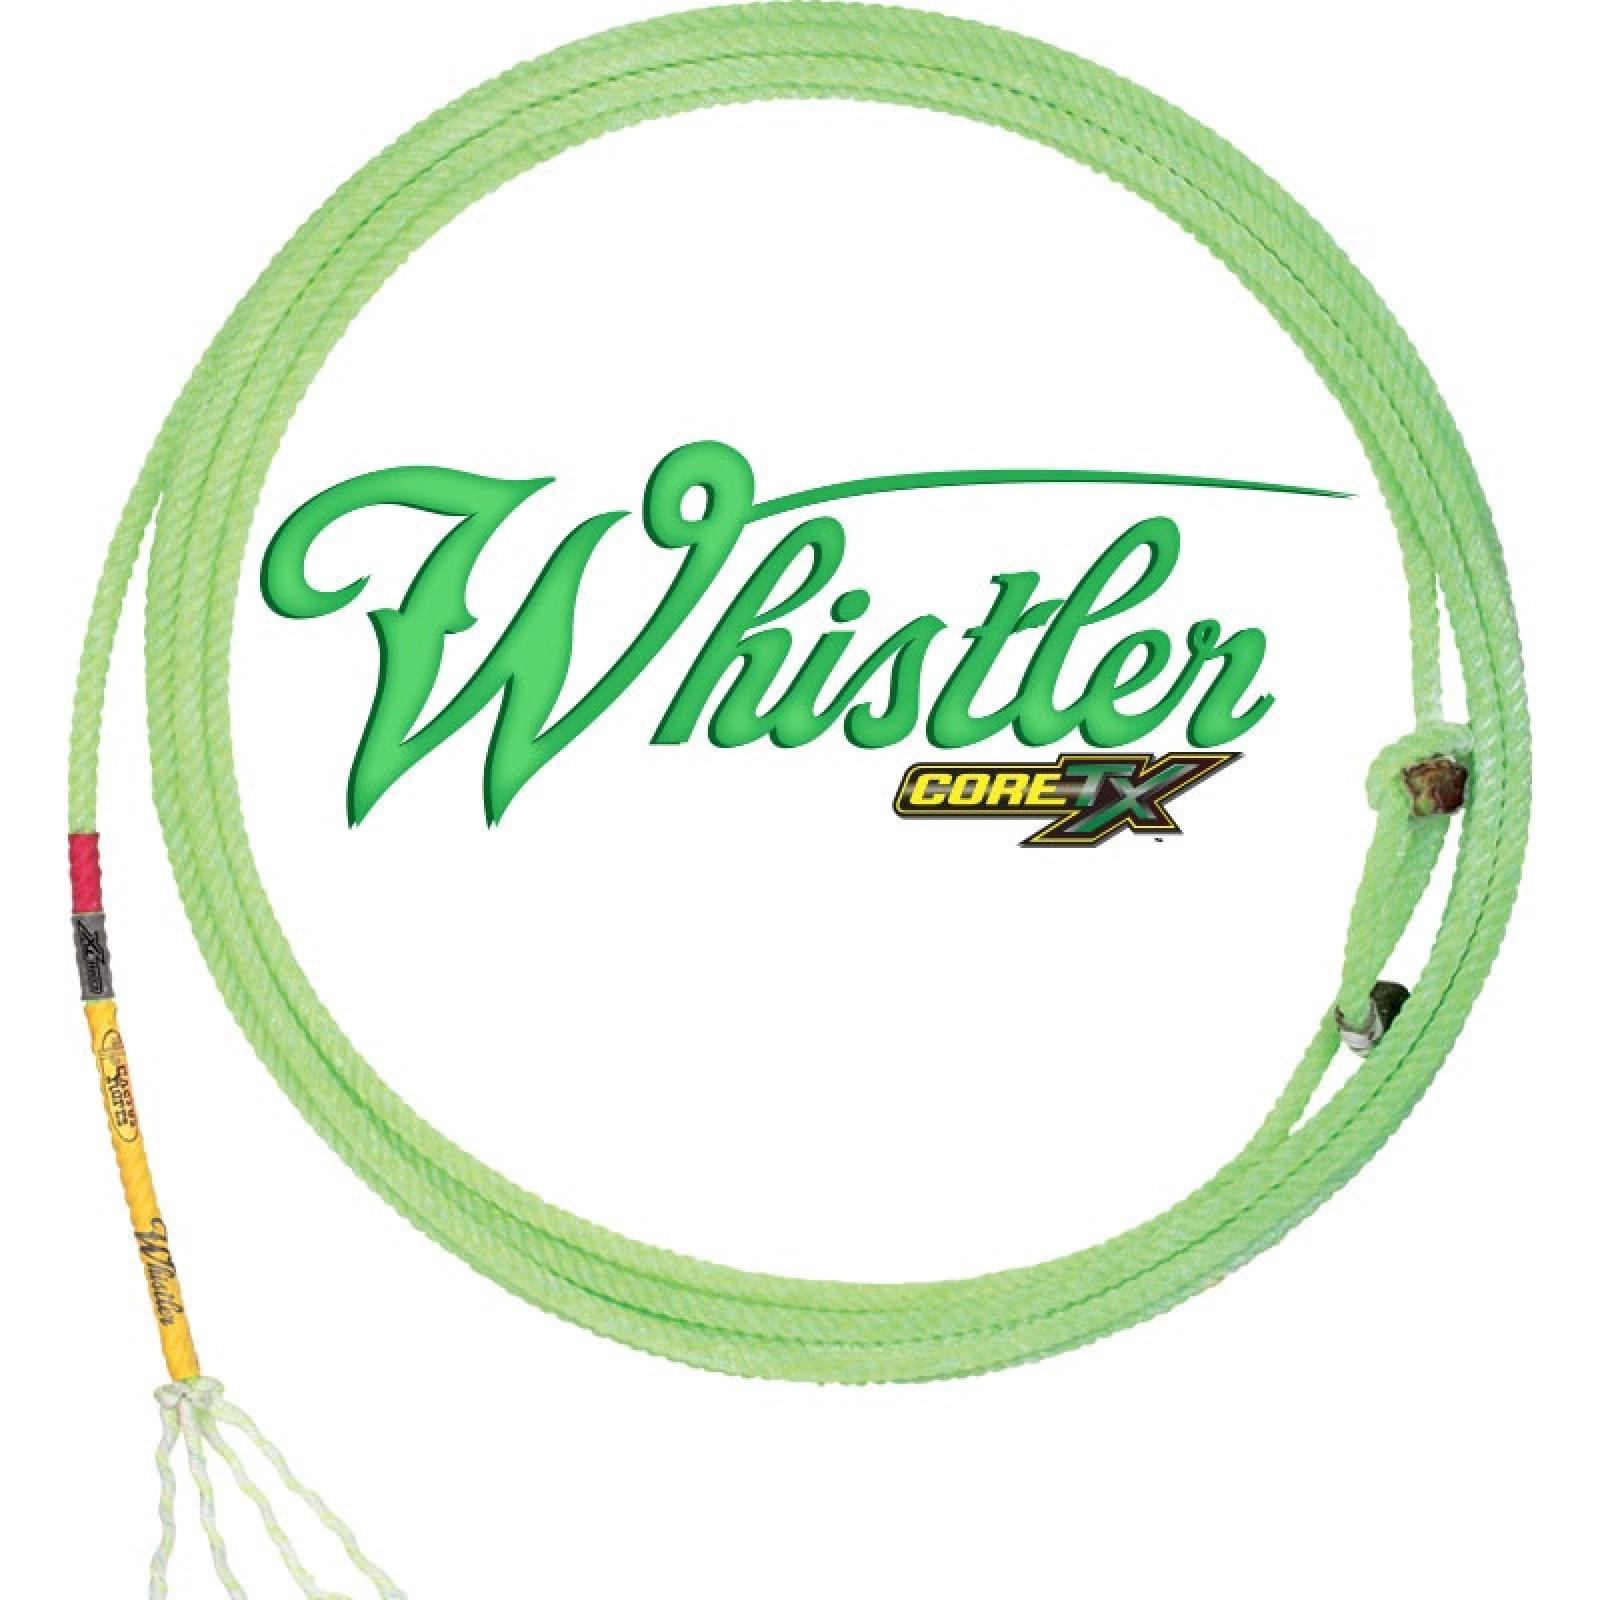 Cactus Ropes Whistler 32' Head Rope